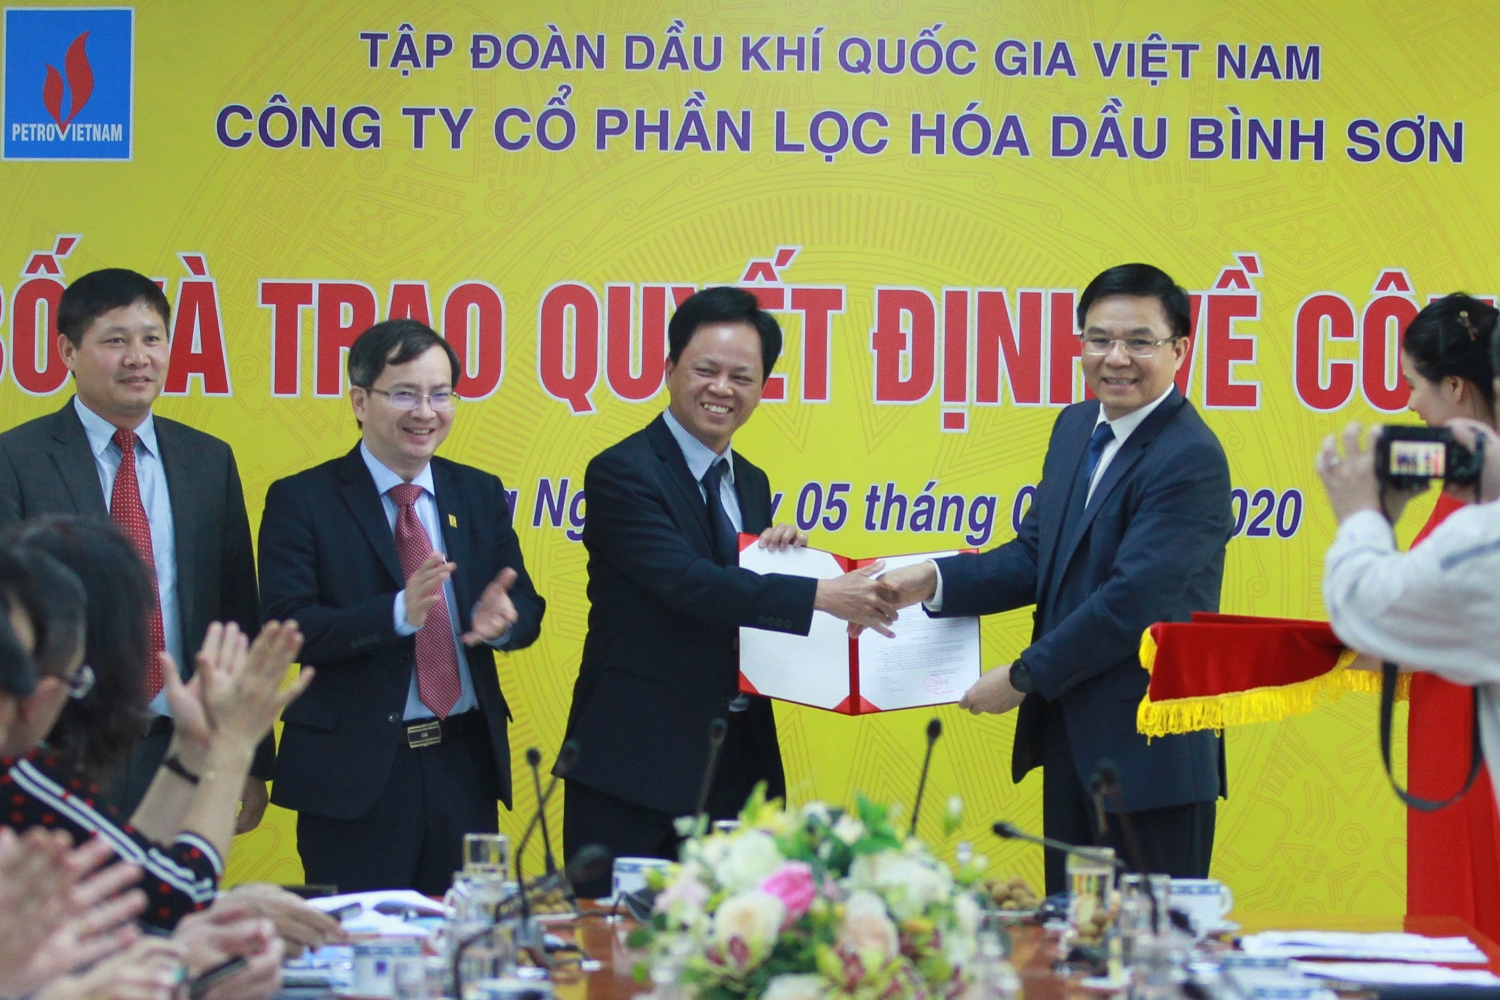 bsr cong bo va trao quyet dinh ve cong tac can bo